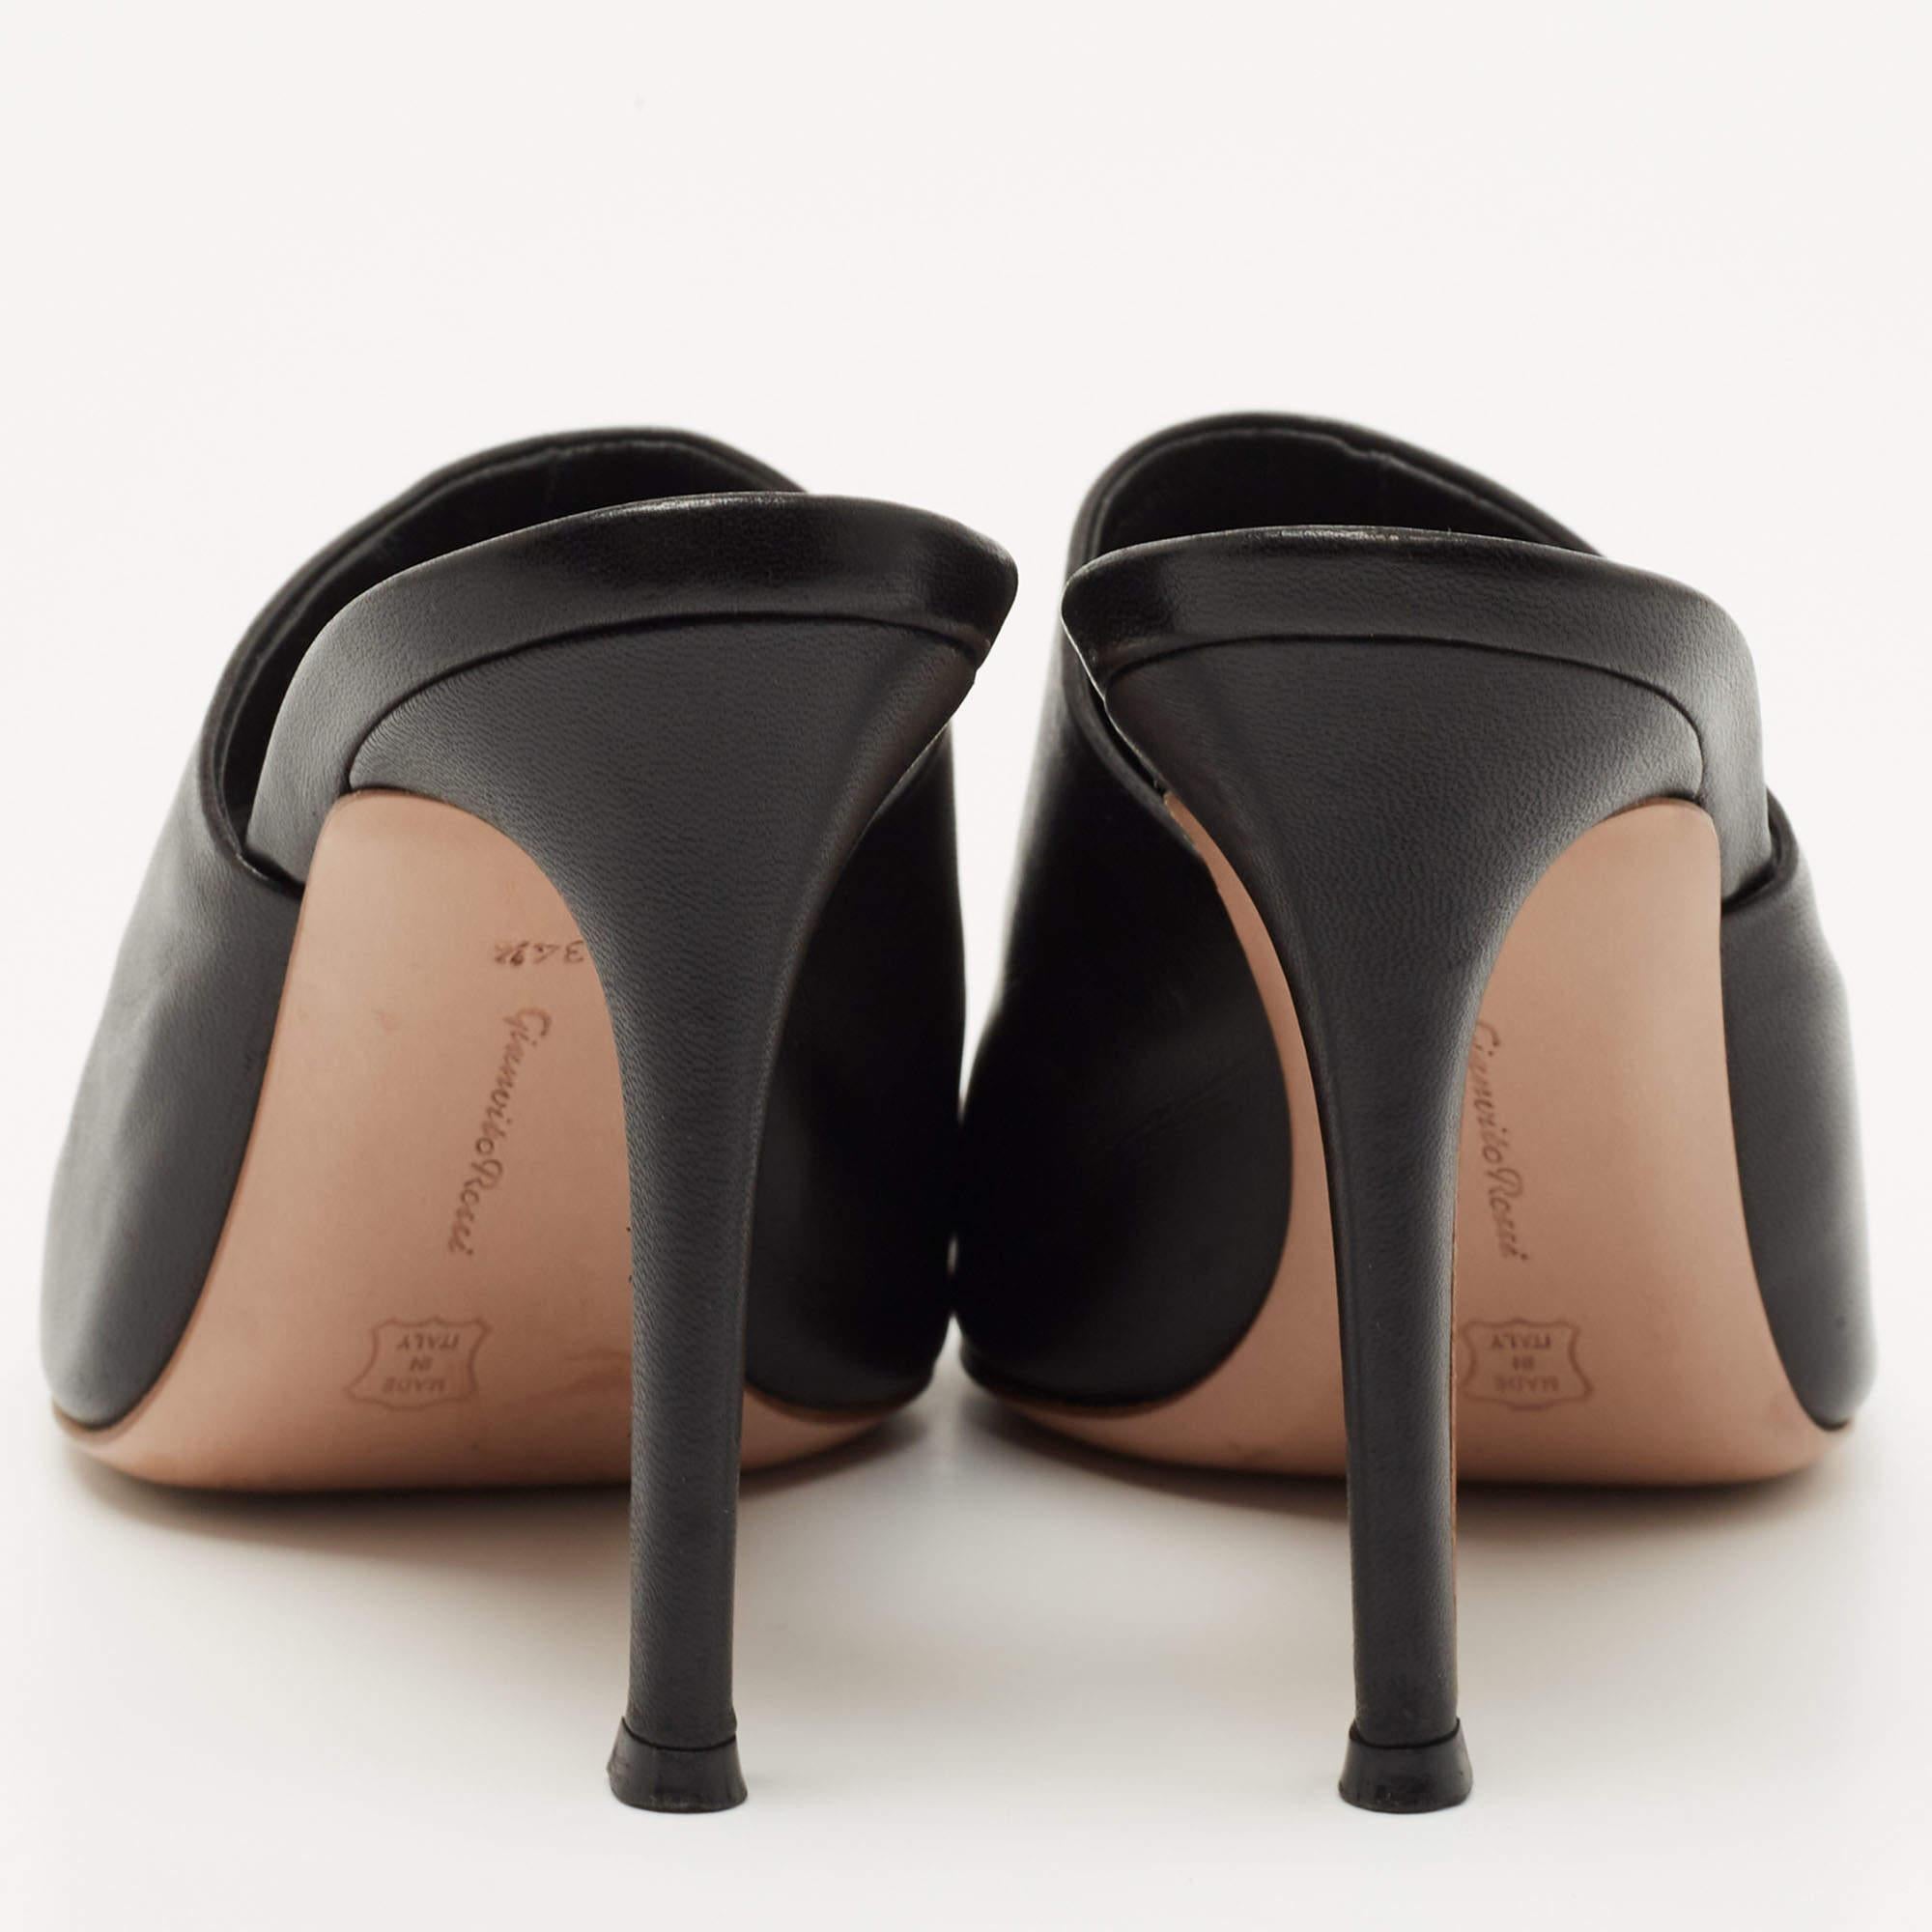 Elevate your look without compromising on comfort when you slip into Gianvito Rossi mules. Made from the finest material, the mules are perfect for any occasion and will leave you feeling confident each time you slip them on.

Includes: Original